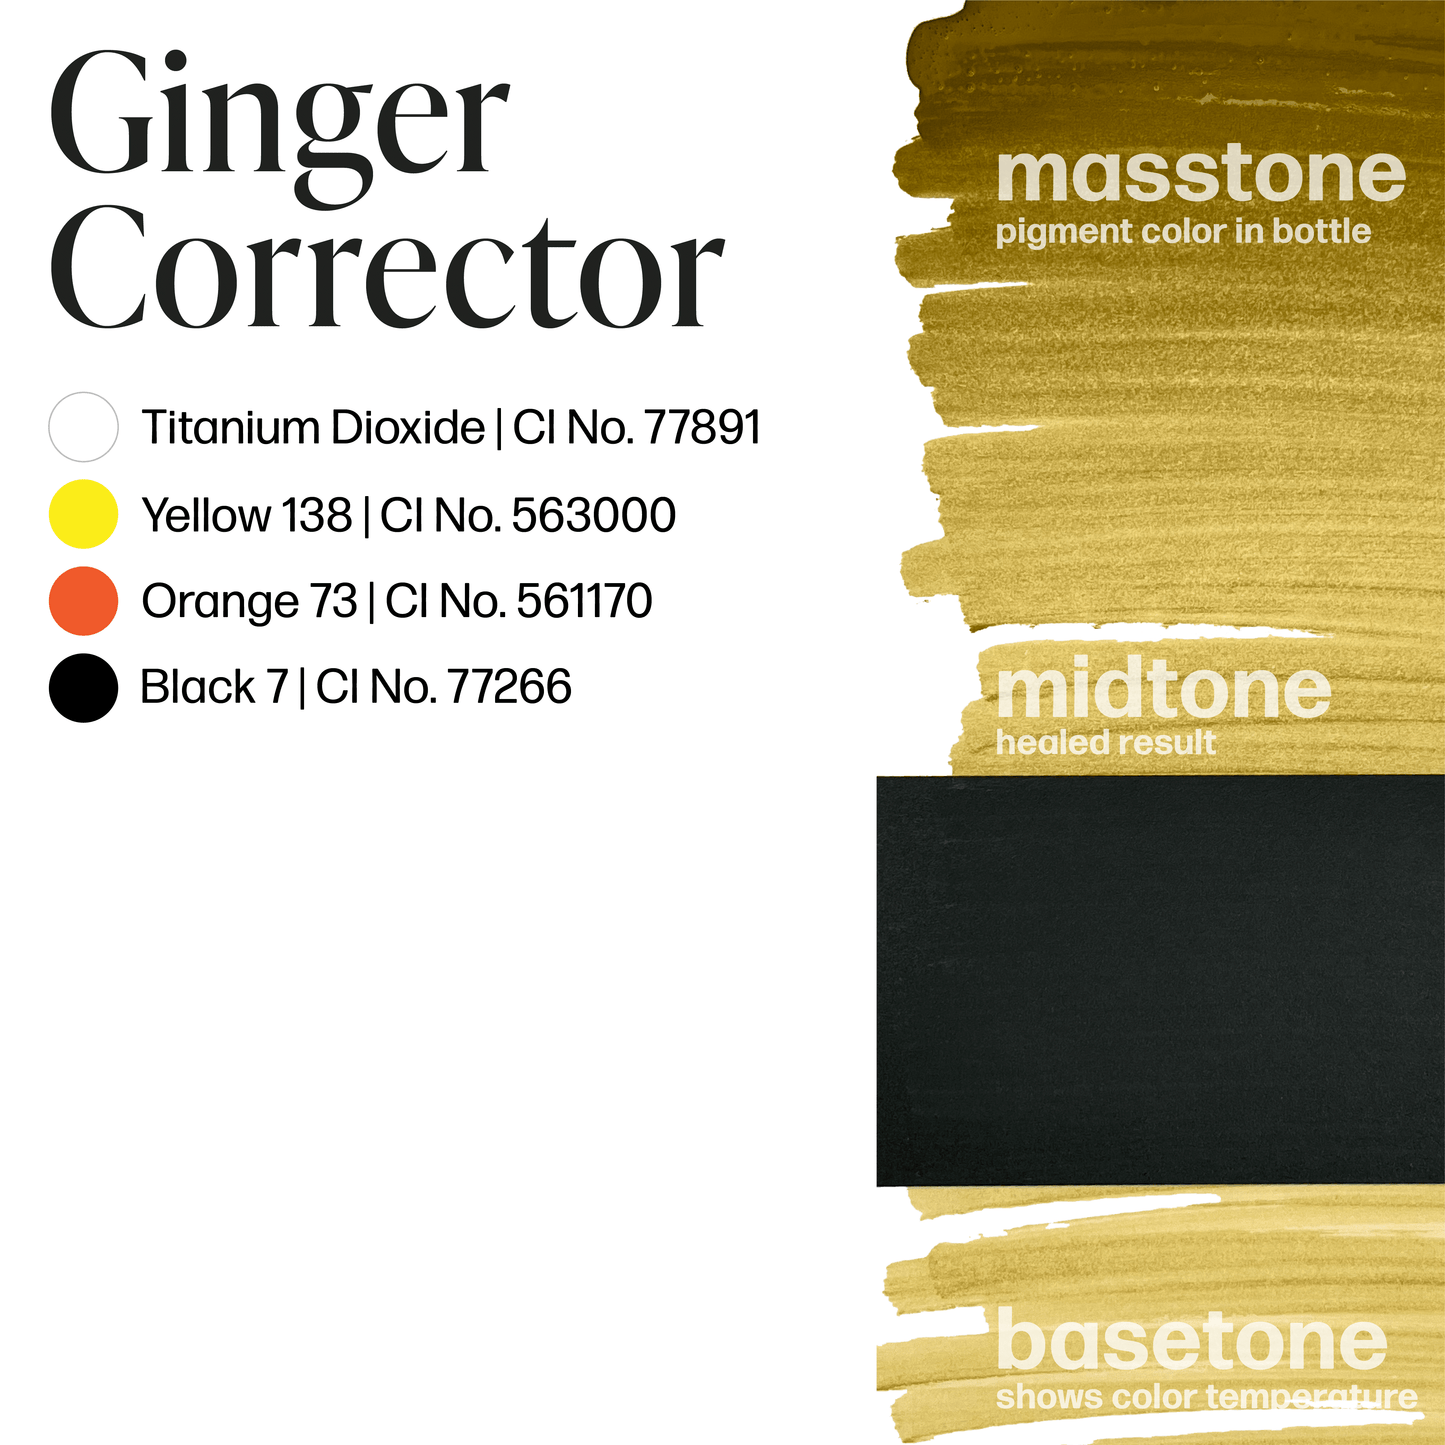 LUXE Ginger Corrector